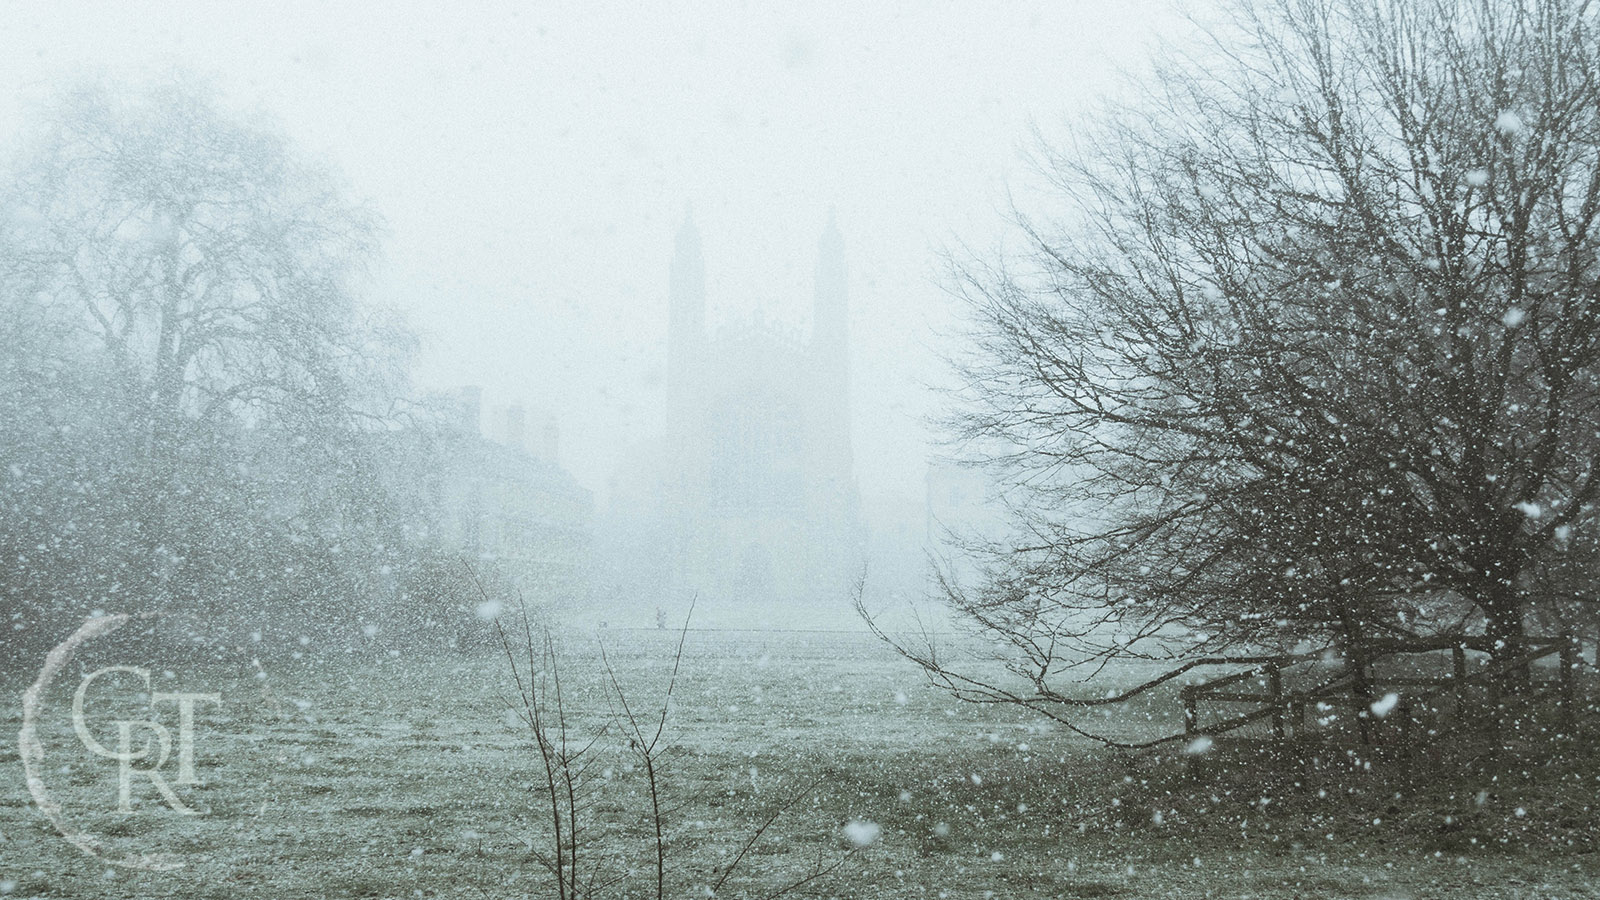 King's college chapel during a snow storm